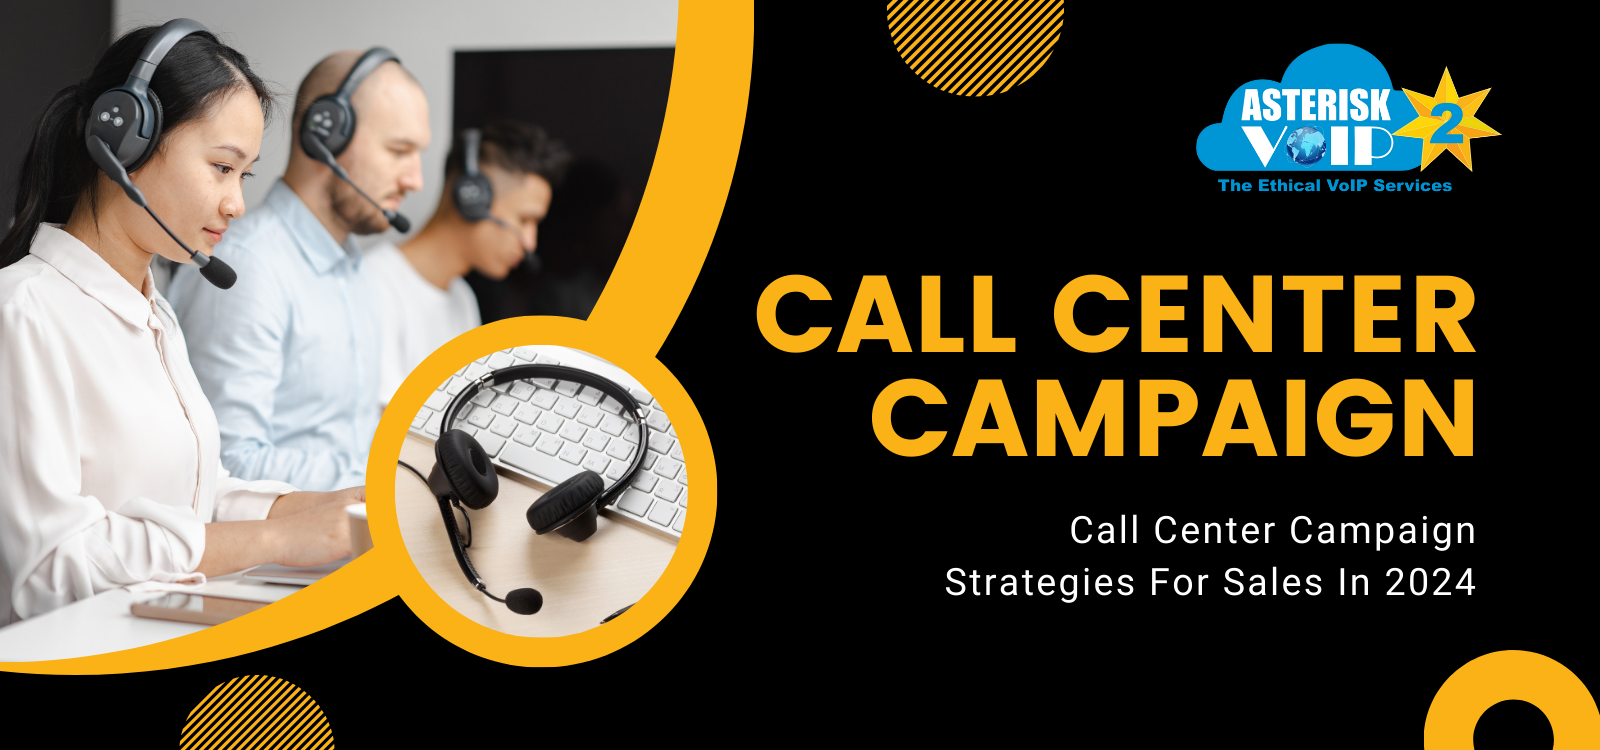 Call Center Campaign Strategies For Sales In 2024